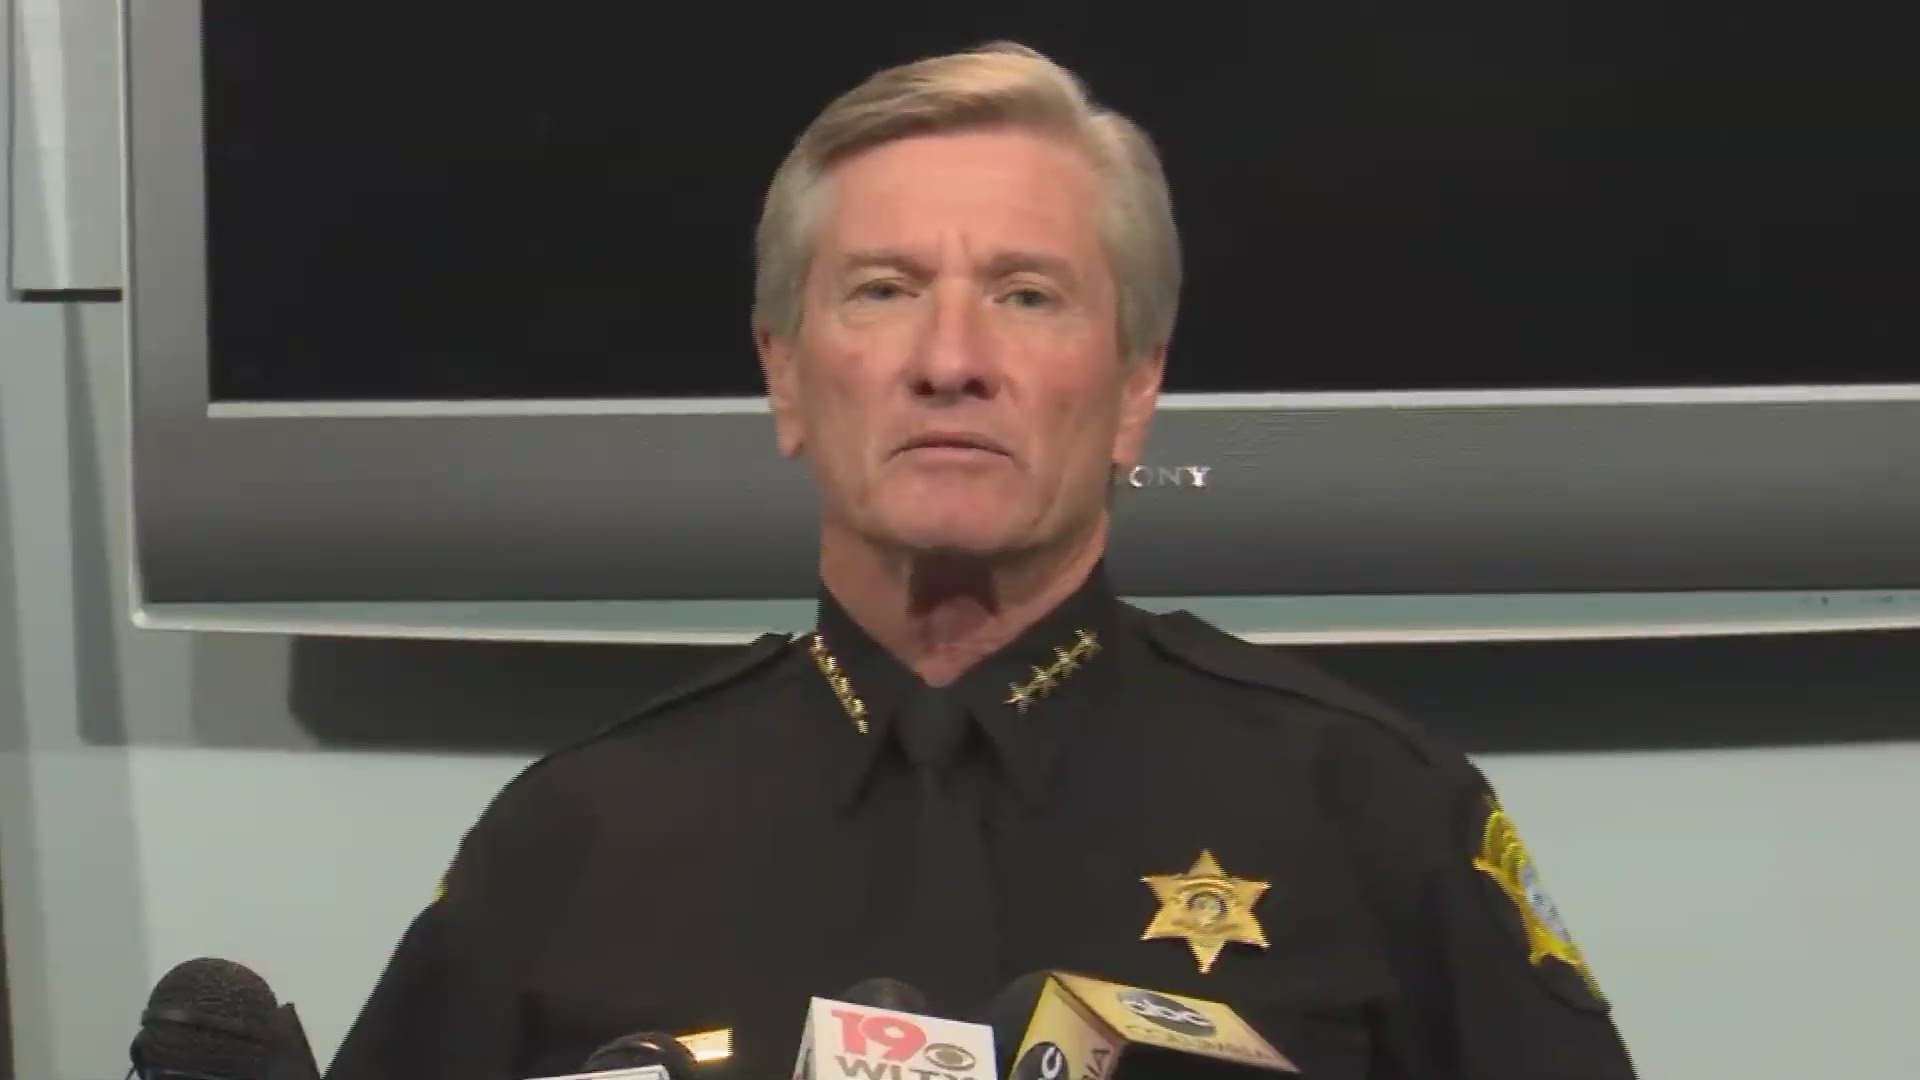 Richland County Sheriff Leon Lott is apologizing for a mounted patrol officer's actions during last Saturday's University of South Carolina football game, calling them 'intimidating' and unnecessary.